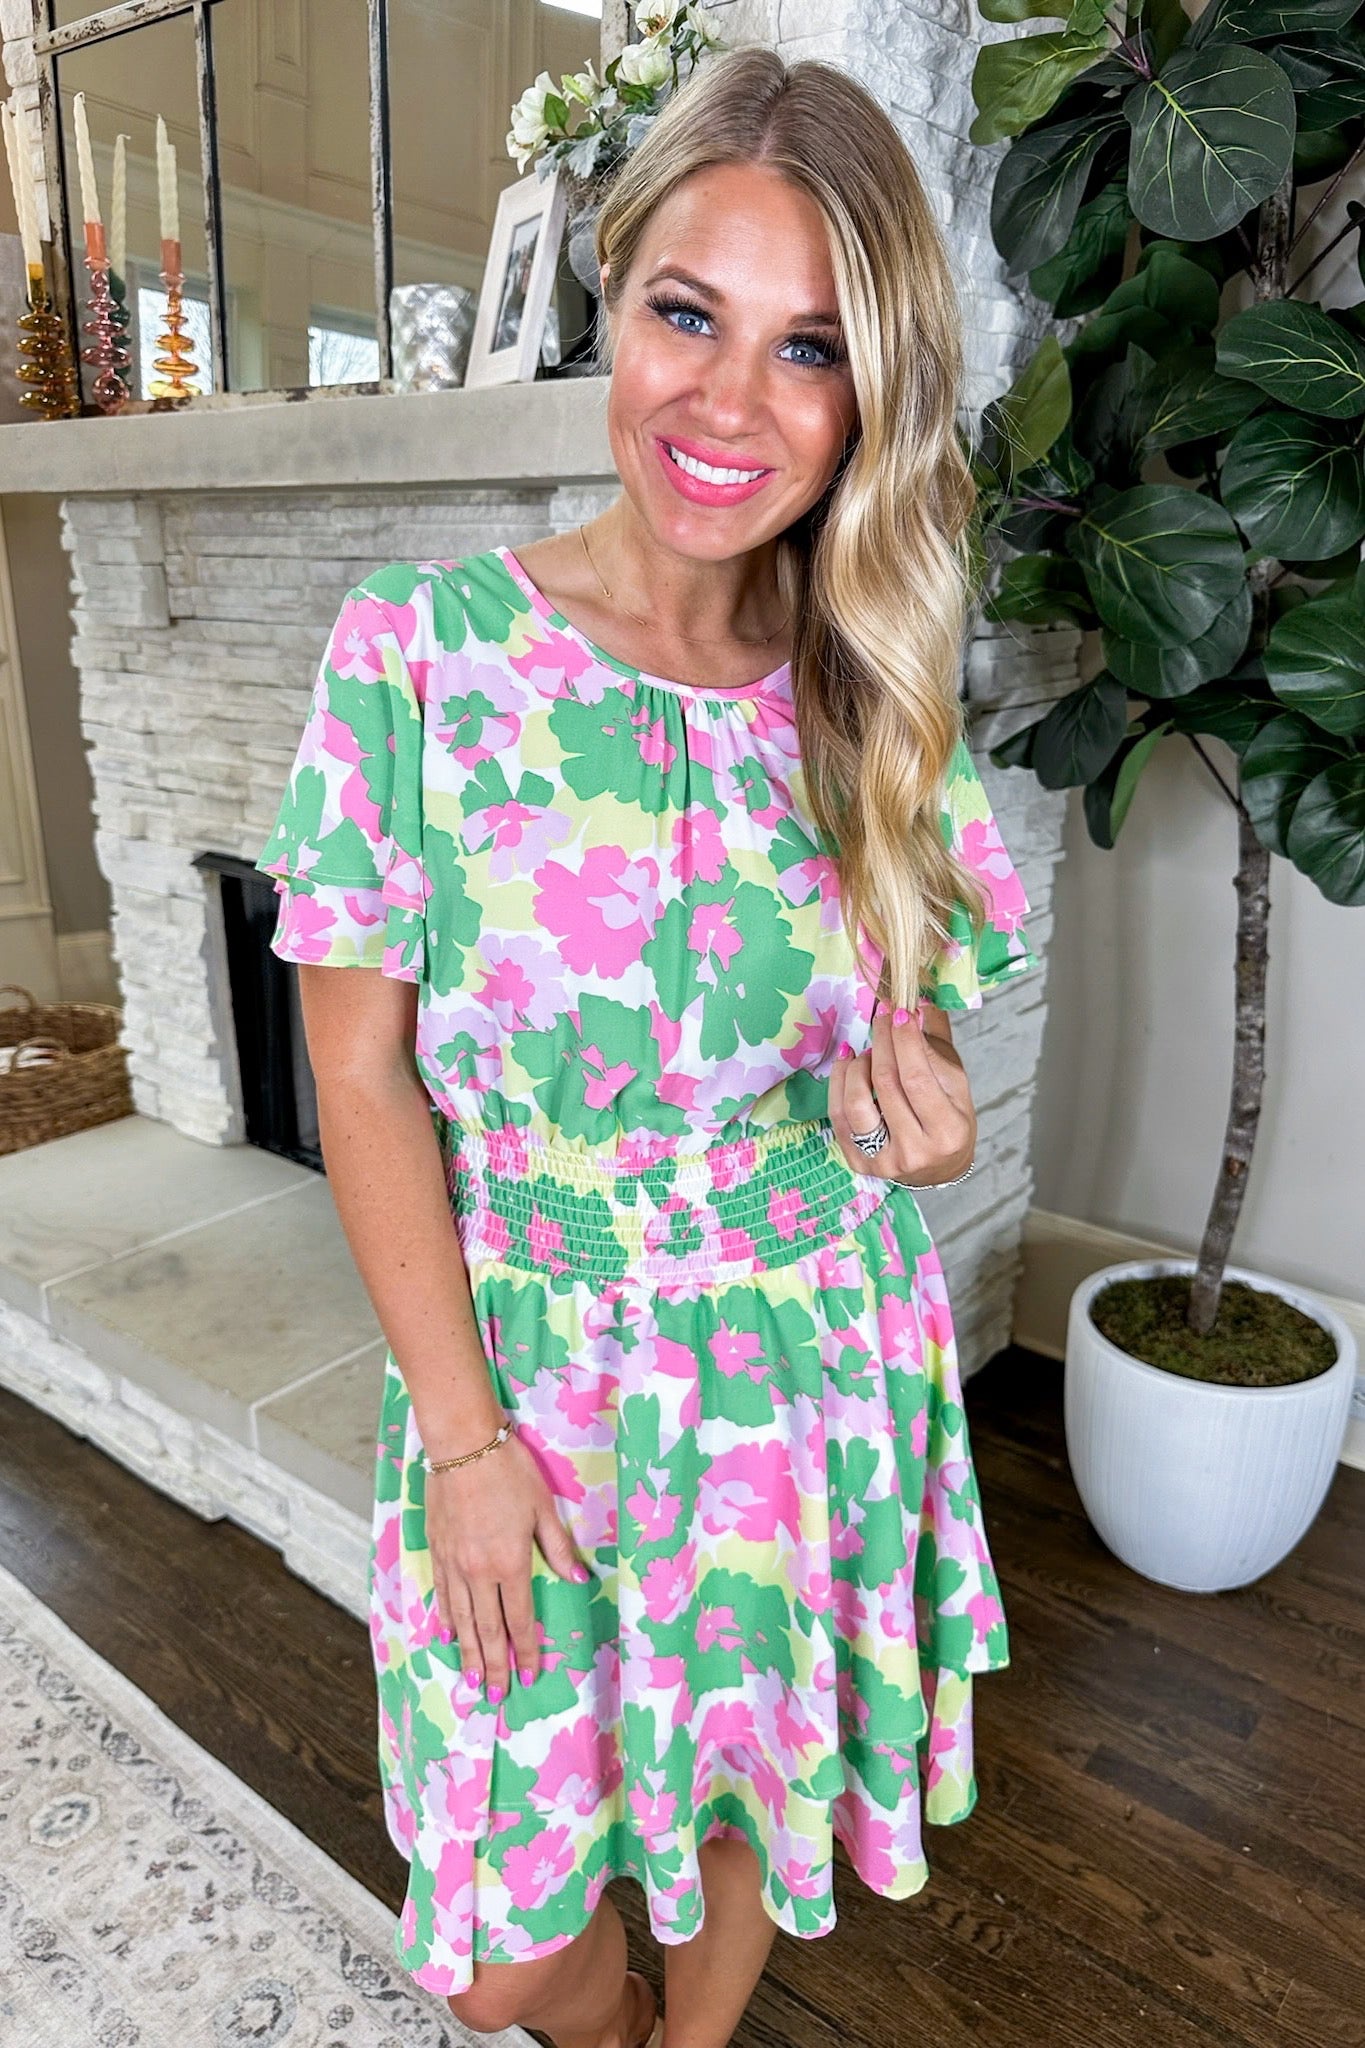 The Haven Primrose Melon Dress by Michelle McDowell